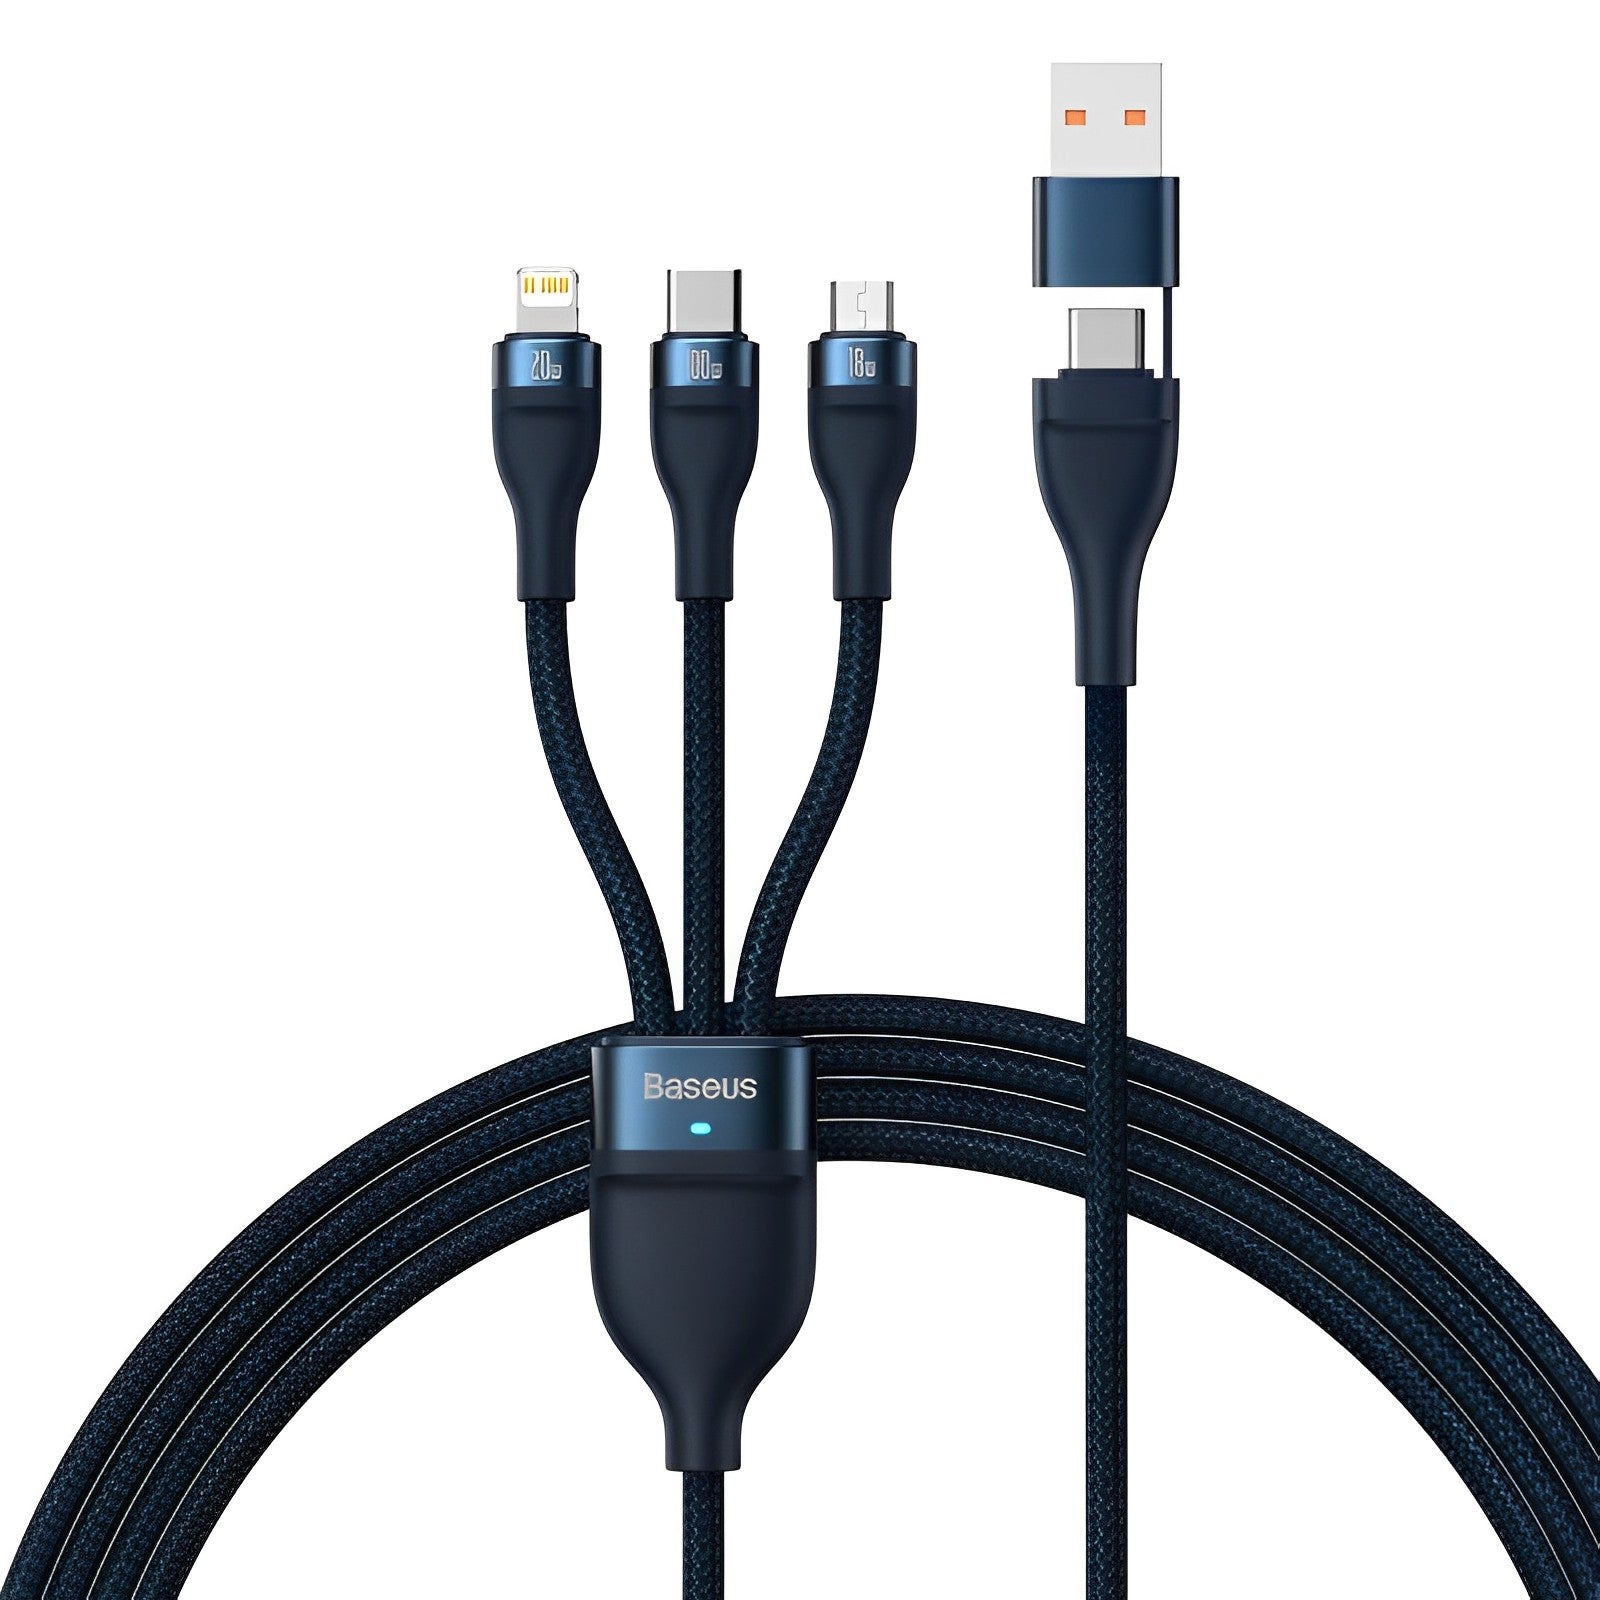 A cable that connects USB-C devices.